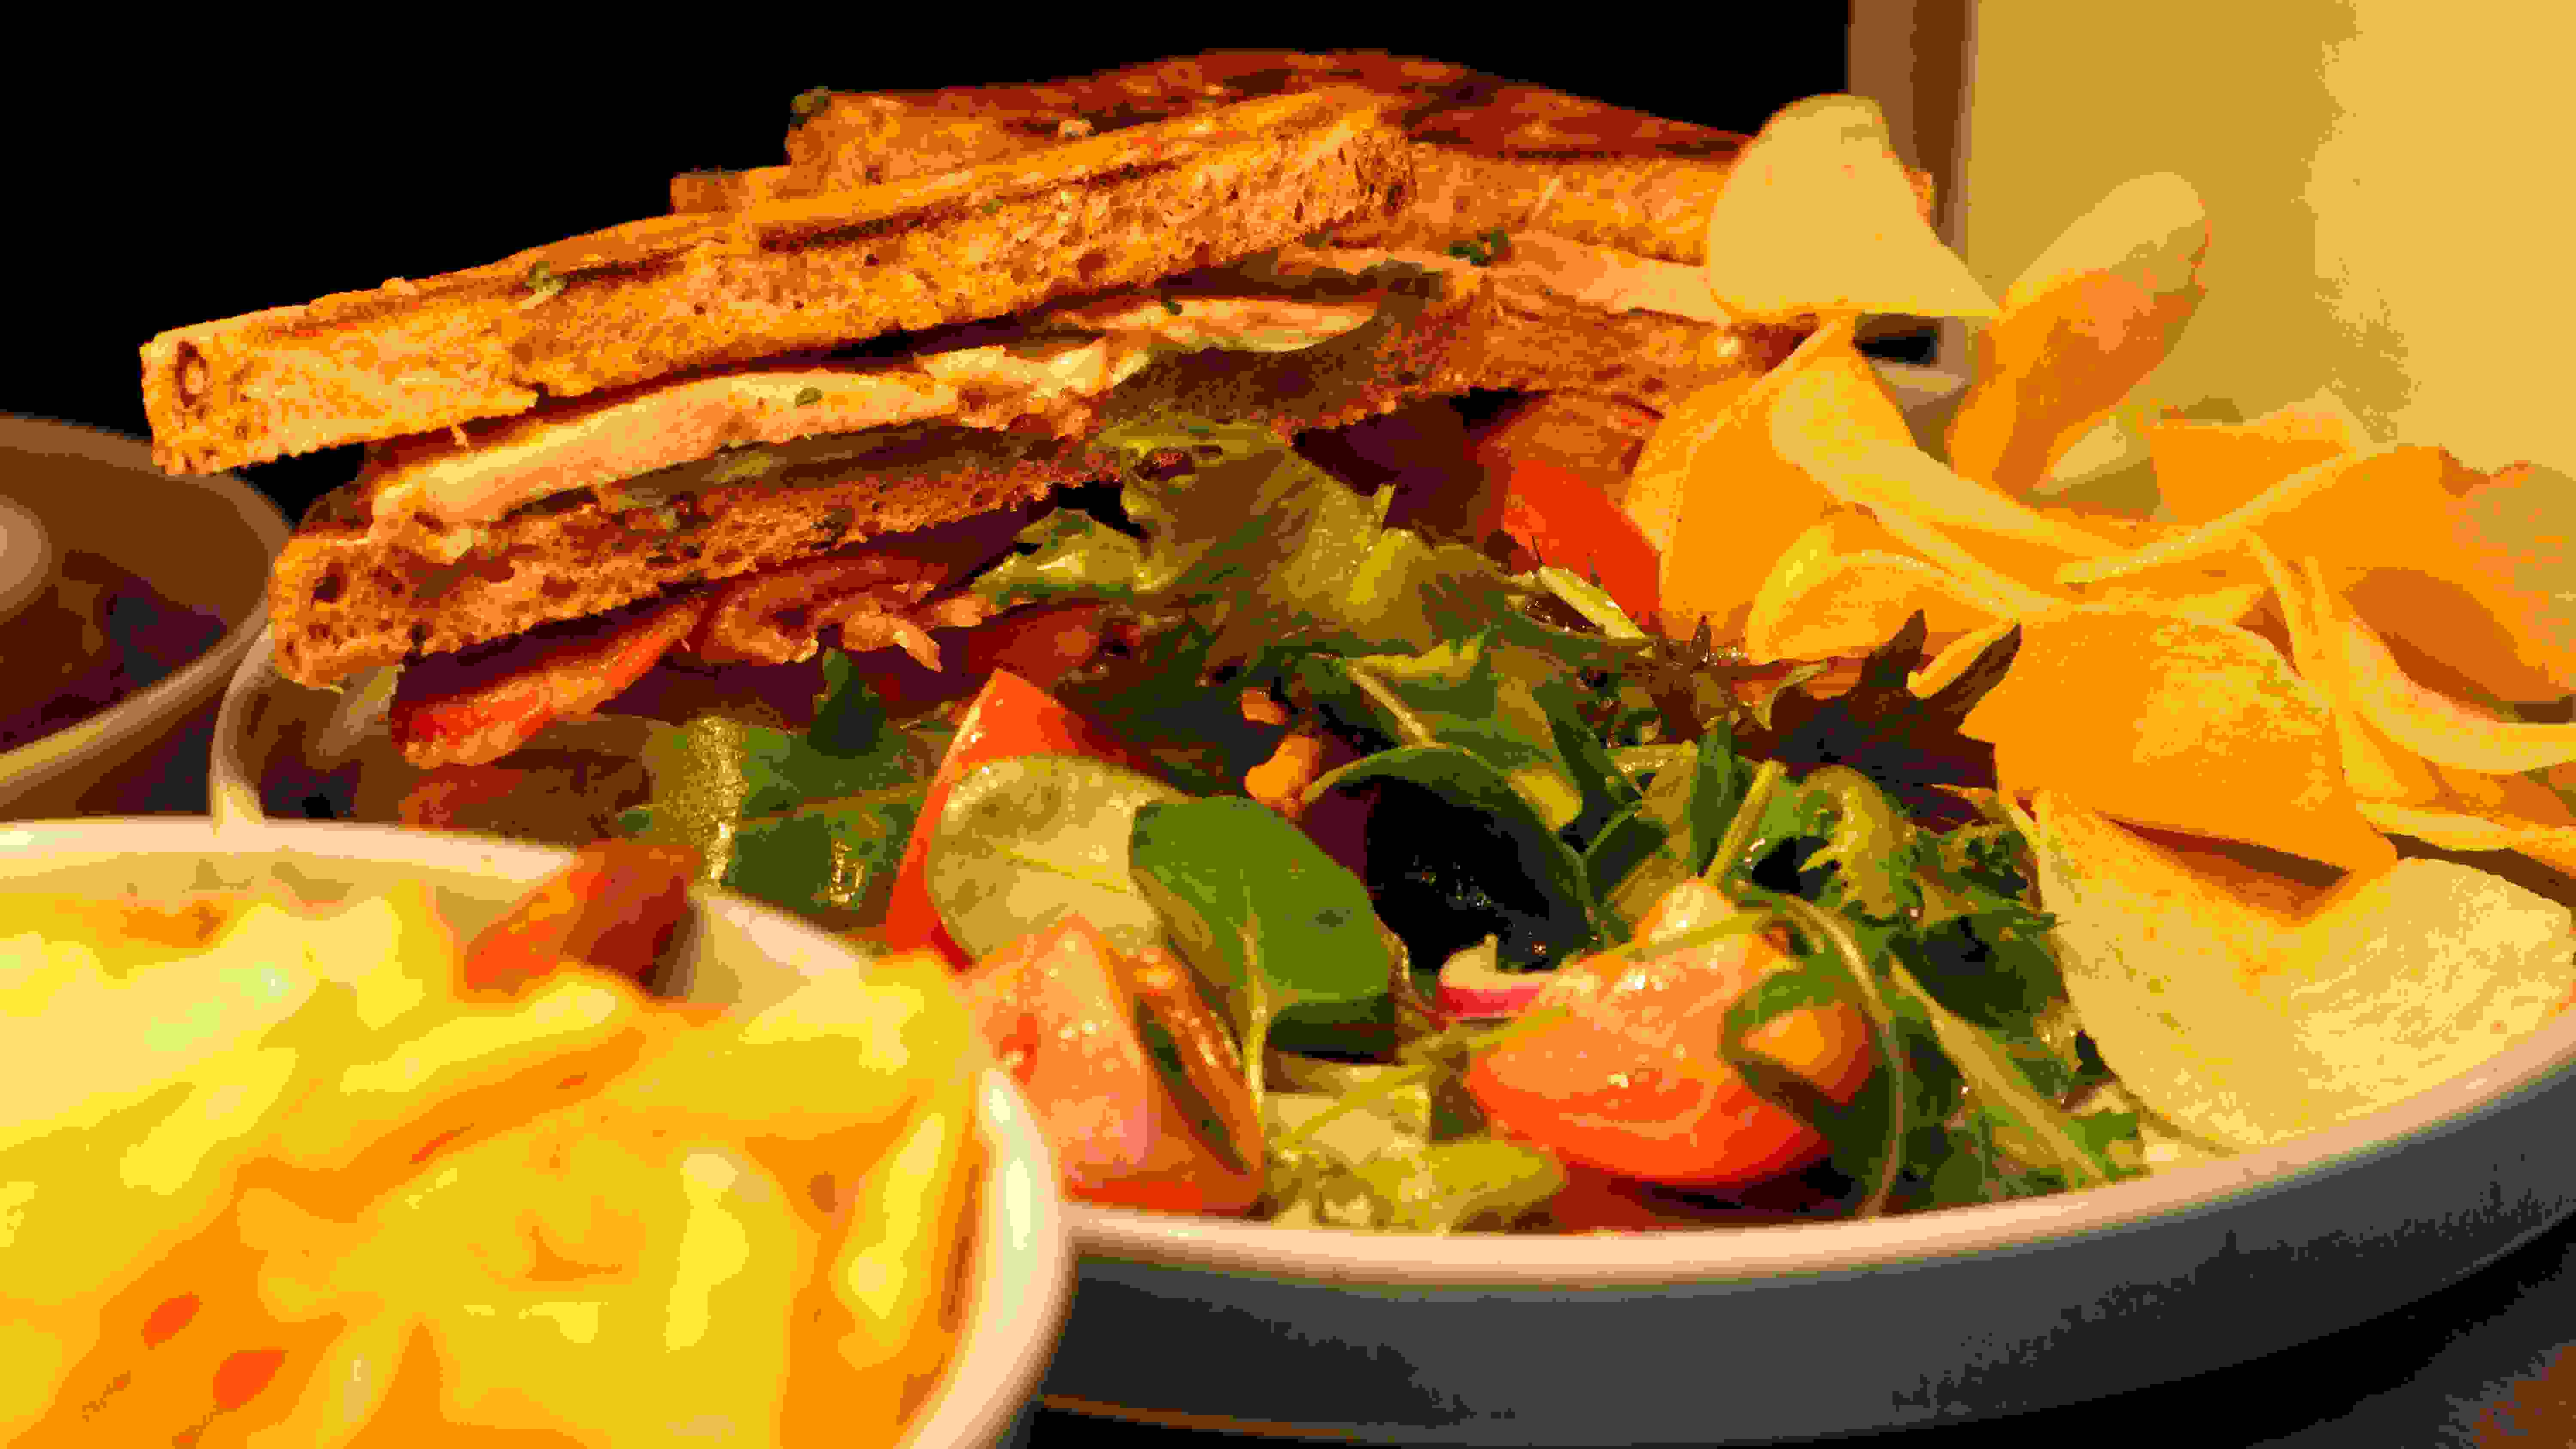 Toasted club sandwich with dressed salad and crisps